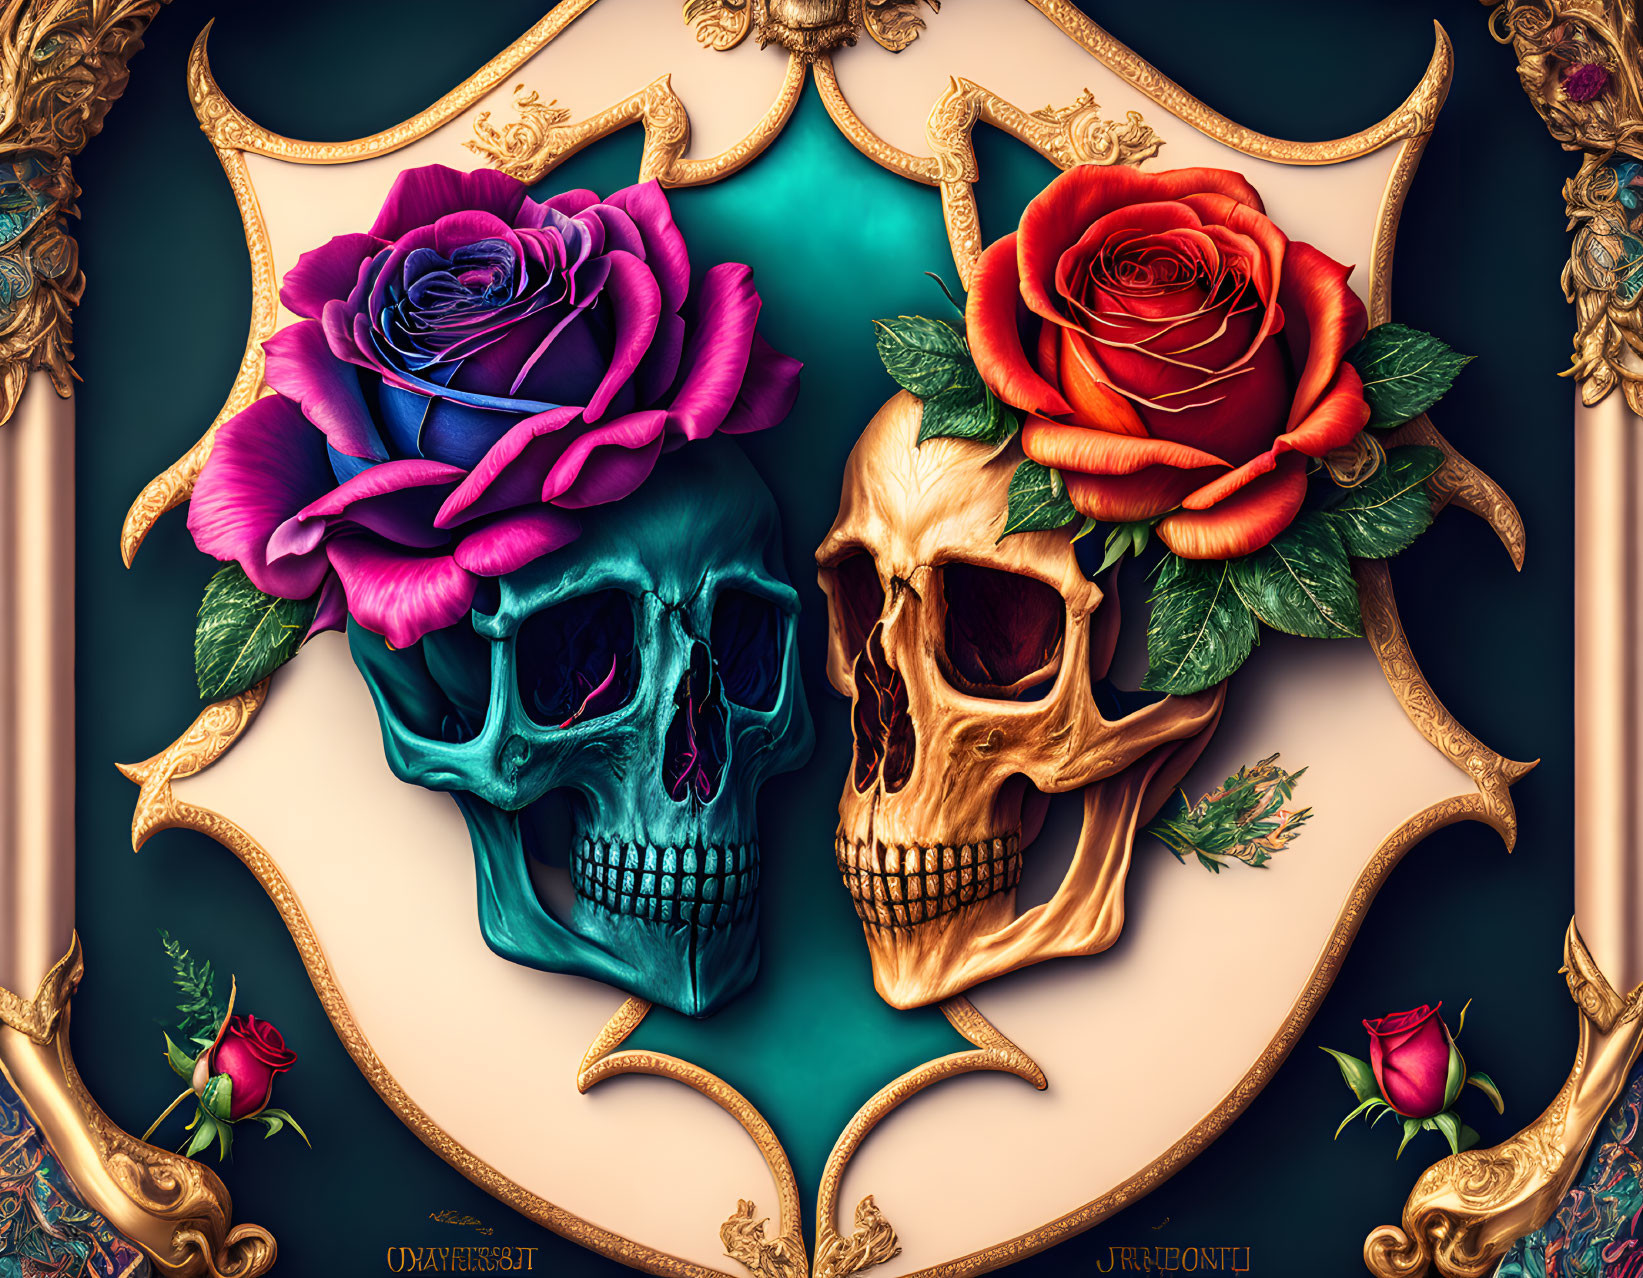 Intricately Decorated Skulls with Multi-Colored Roses on Dark Teal Background